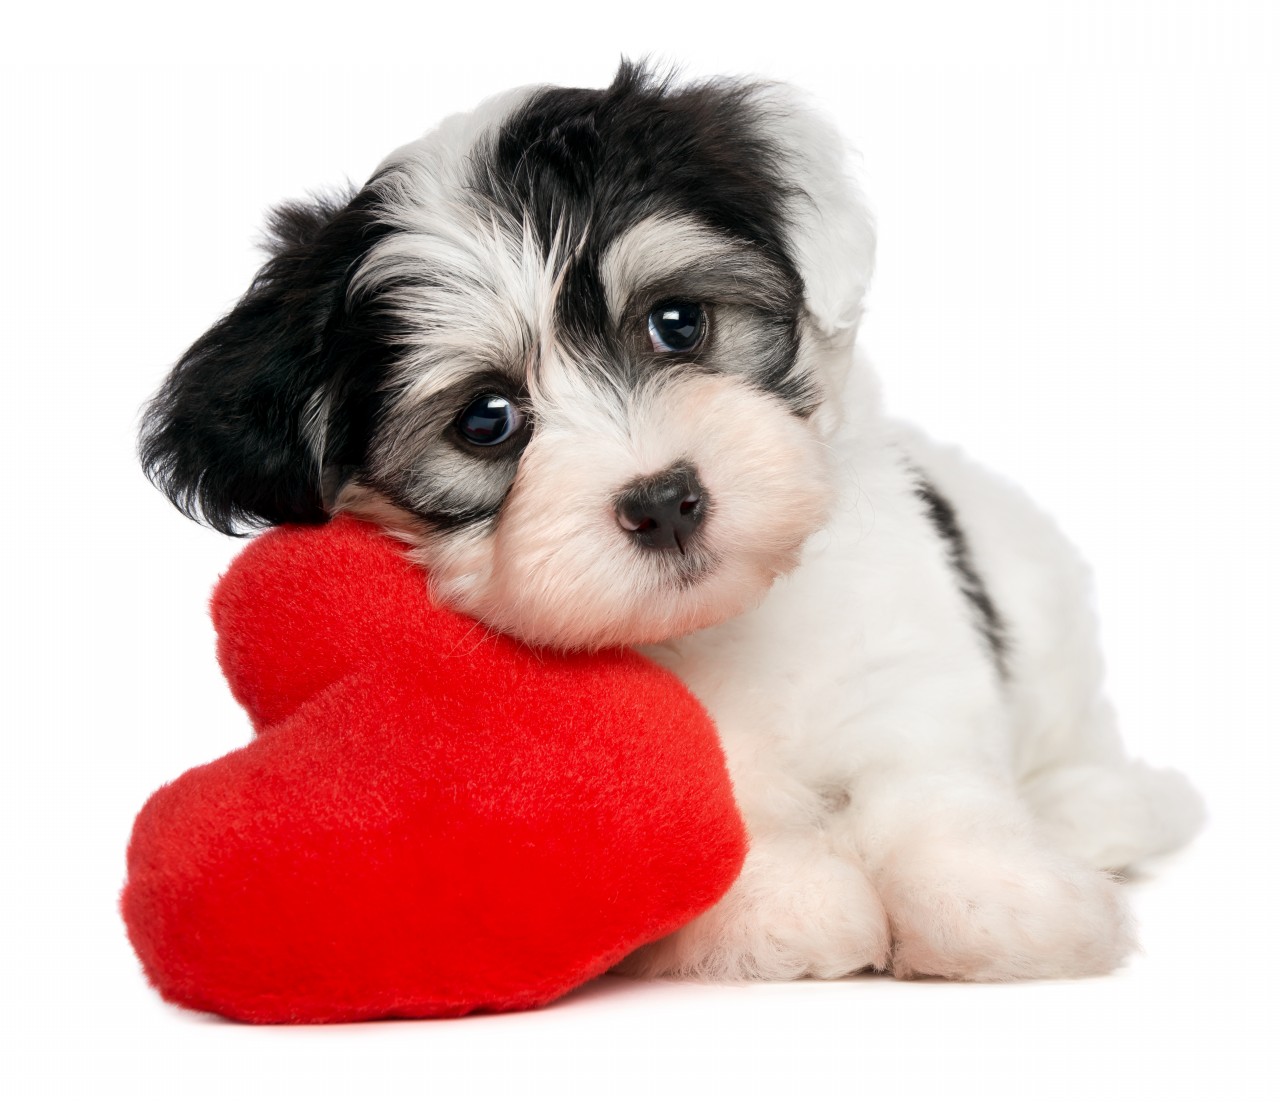 Dog With Big Heart Photo And Wallpaper Beautiful